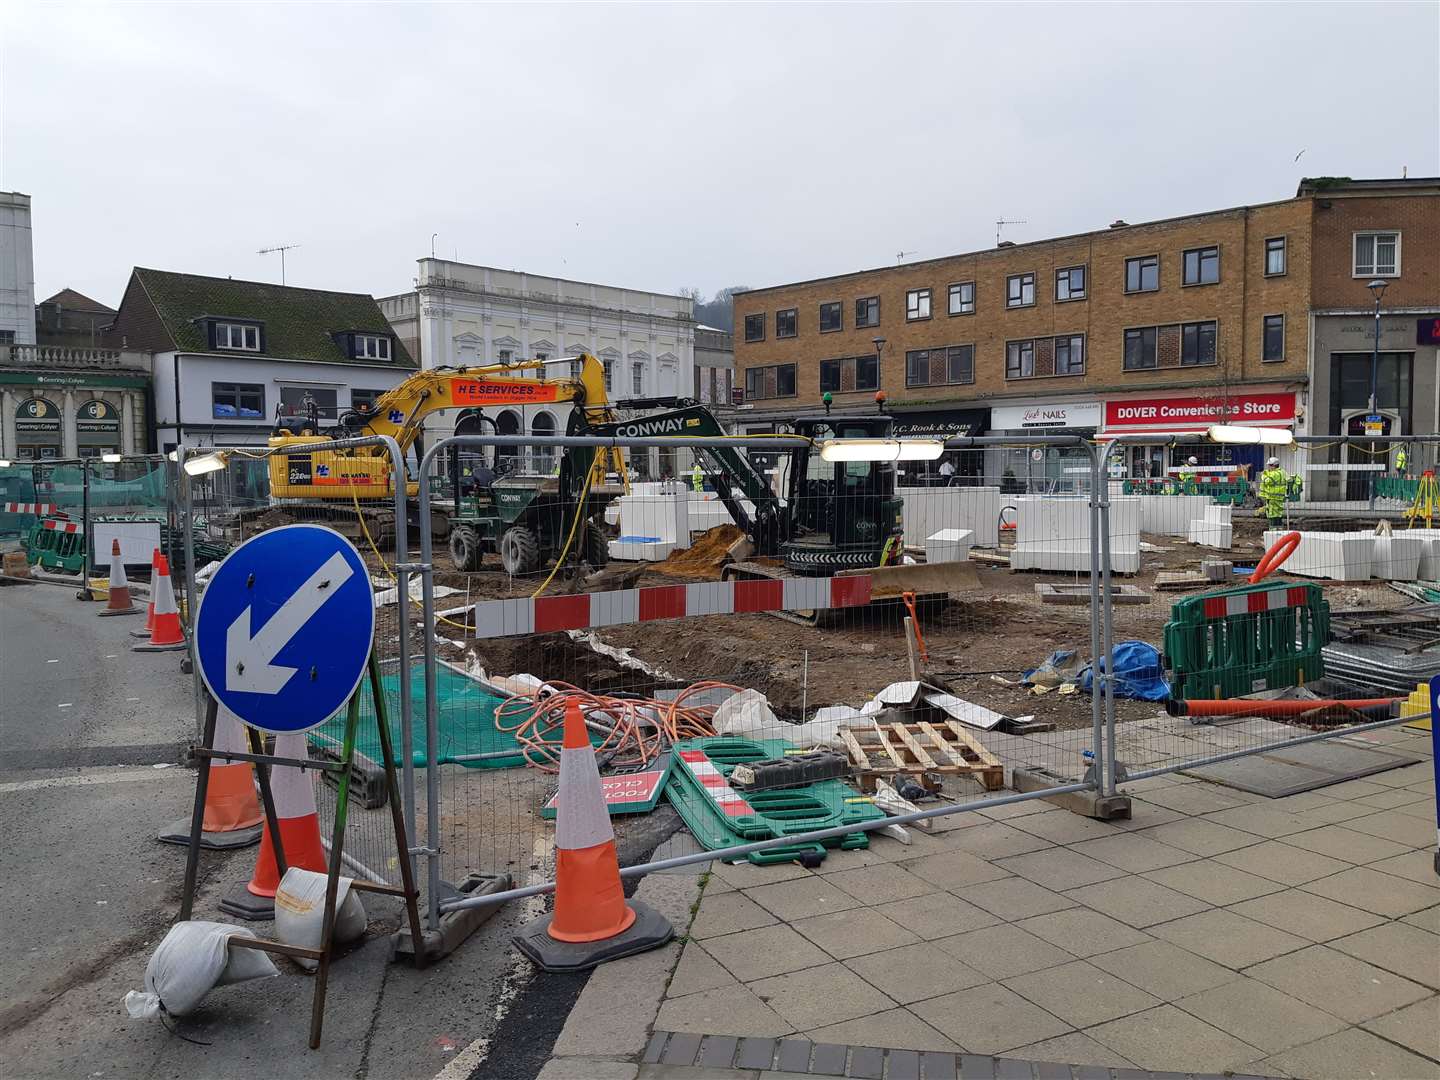 Work continues on redeveloping Market Square, as seen today.Picture: Sam Lennon KMG